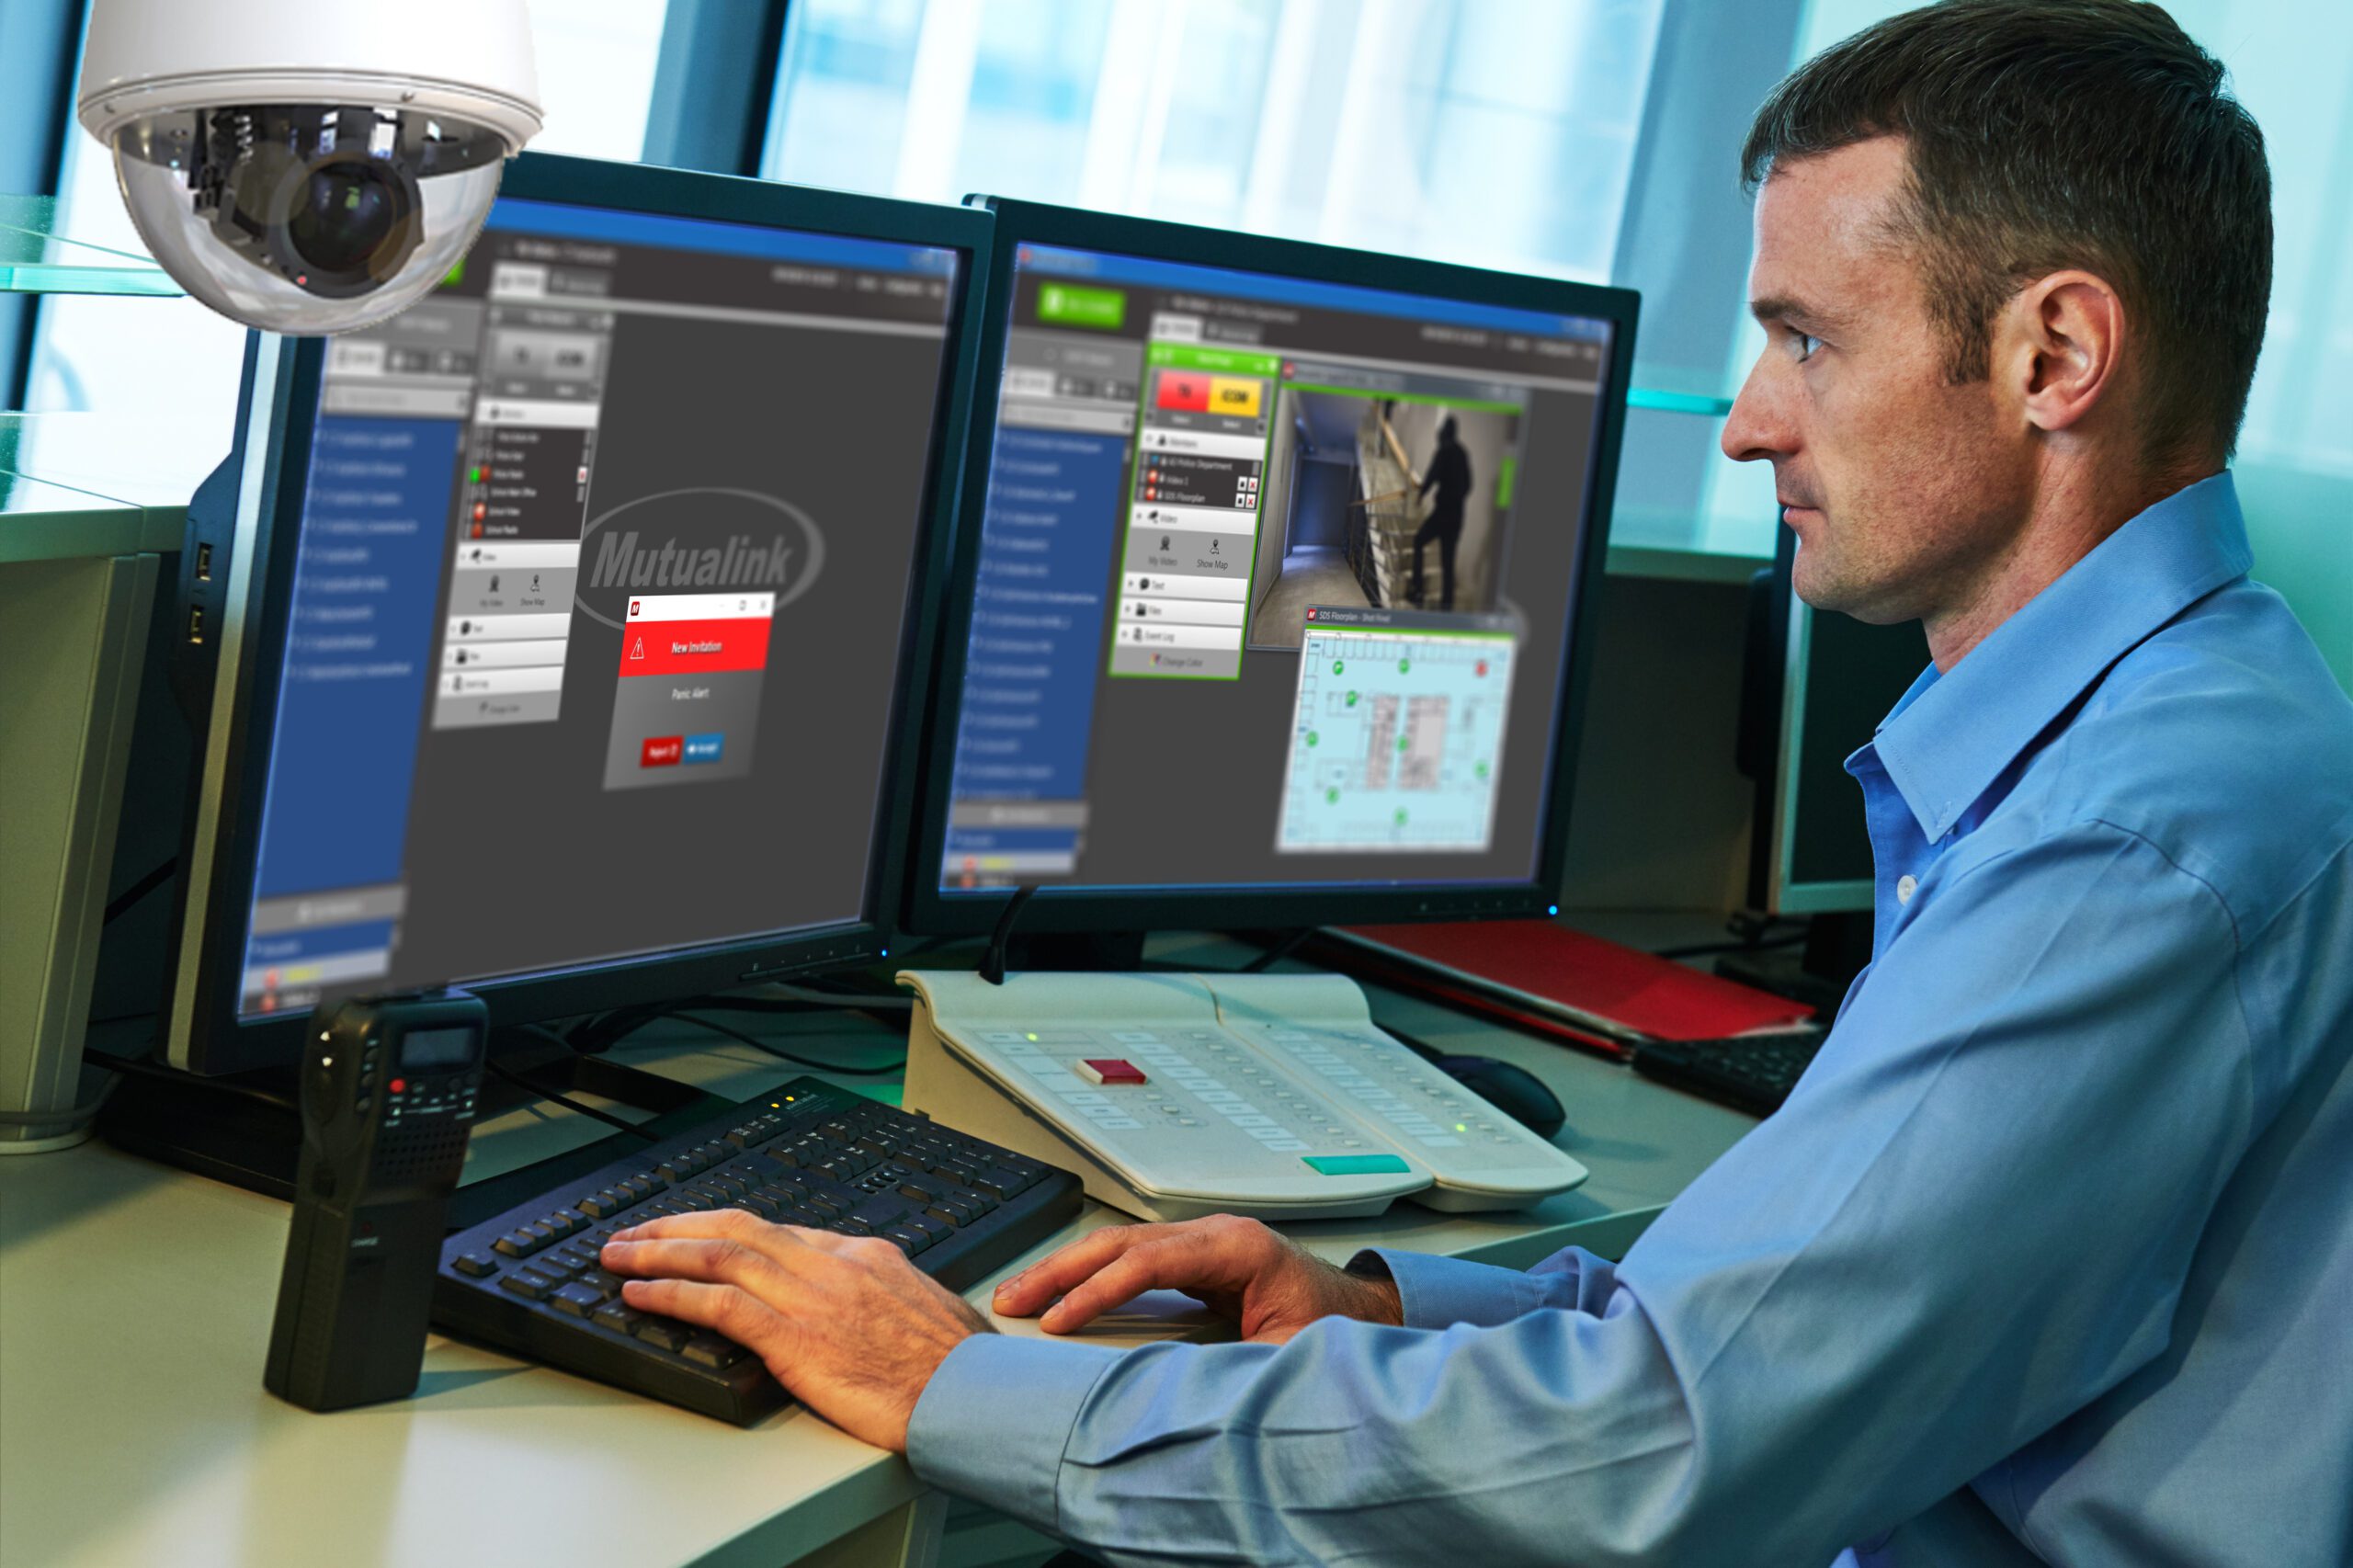 An emergency response solution is demonstrated by an officer. He is sitting at a desk with multiple monitors utilizing Mutualink's automated emergency response solution, reviewing the details of an alert he just received. He is on the right hand side of the image looking to the left, where you can see his two monitors. On the monitors you see he is using Mutualink's Automated Emergency Response solution - the sophisticated and secure technology gives him immediate visual and communication access with the school who made the alert, as well as smart floor plans. He is serious, focused, and dedicated to conducting the most efficient emergency response.